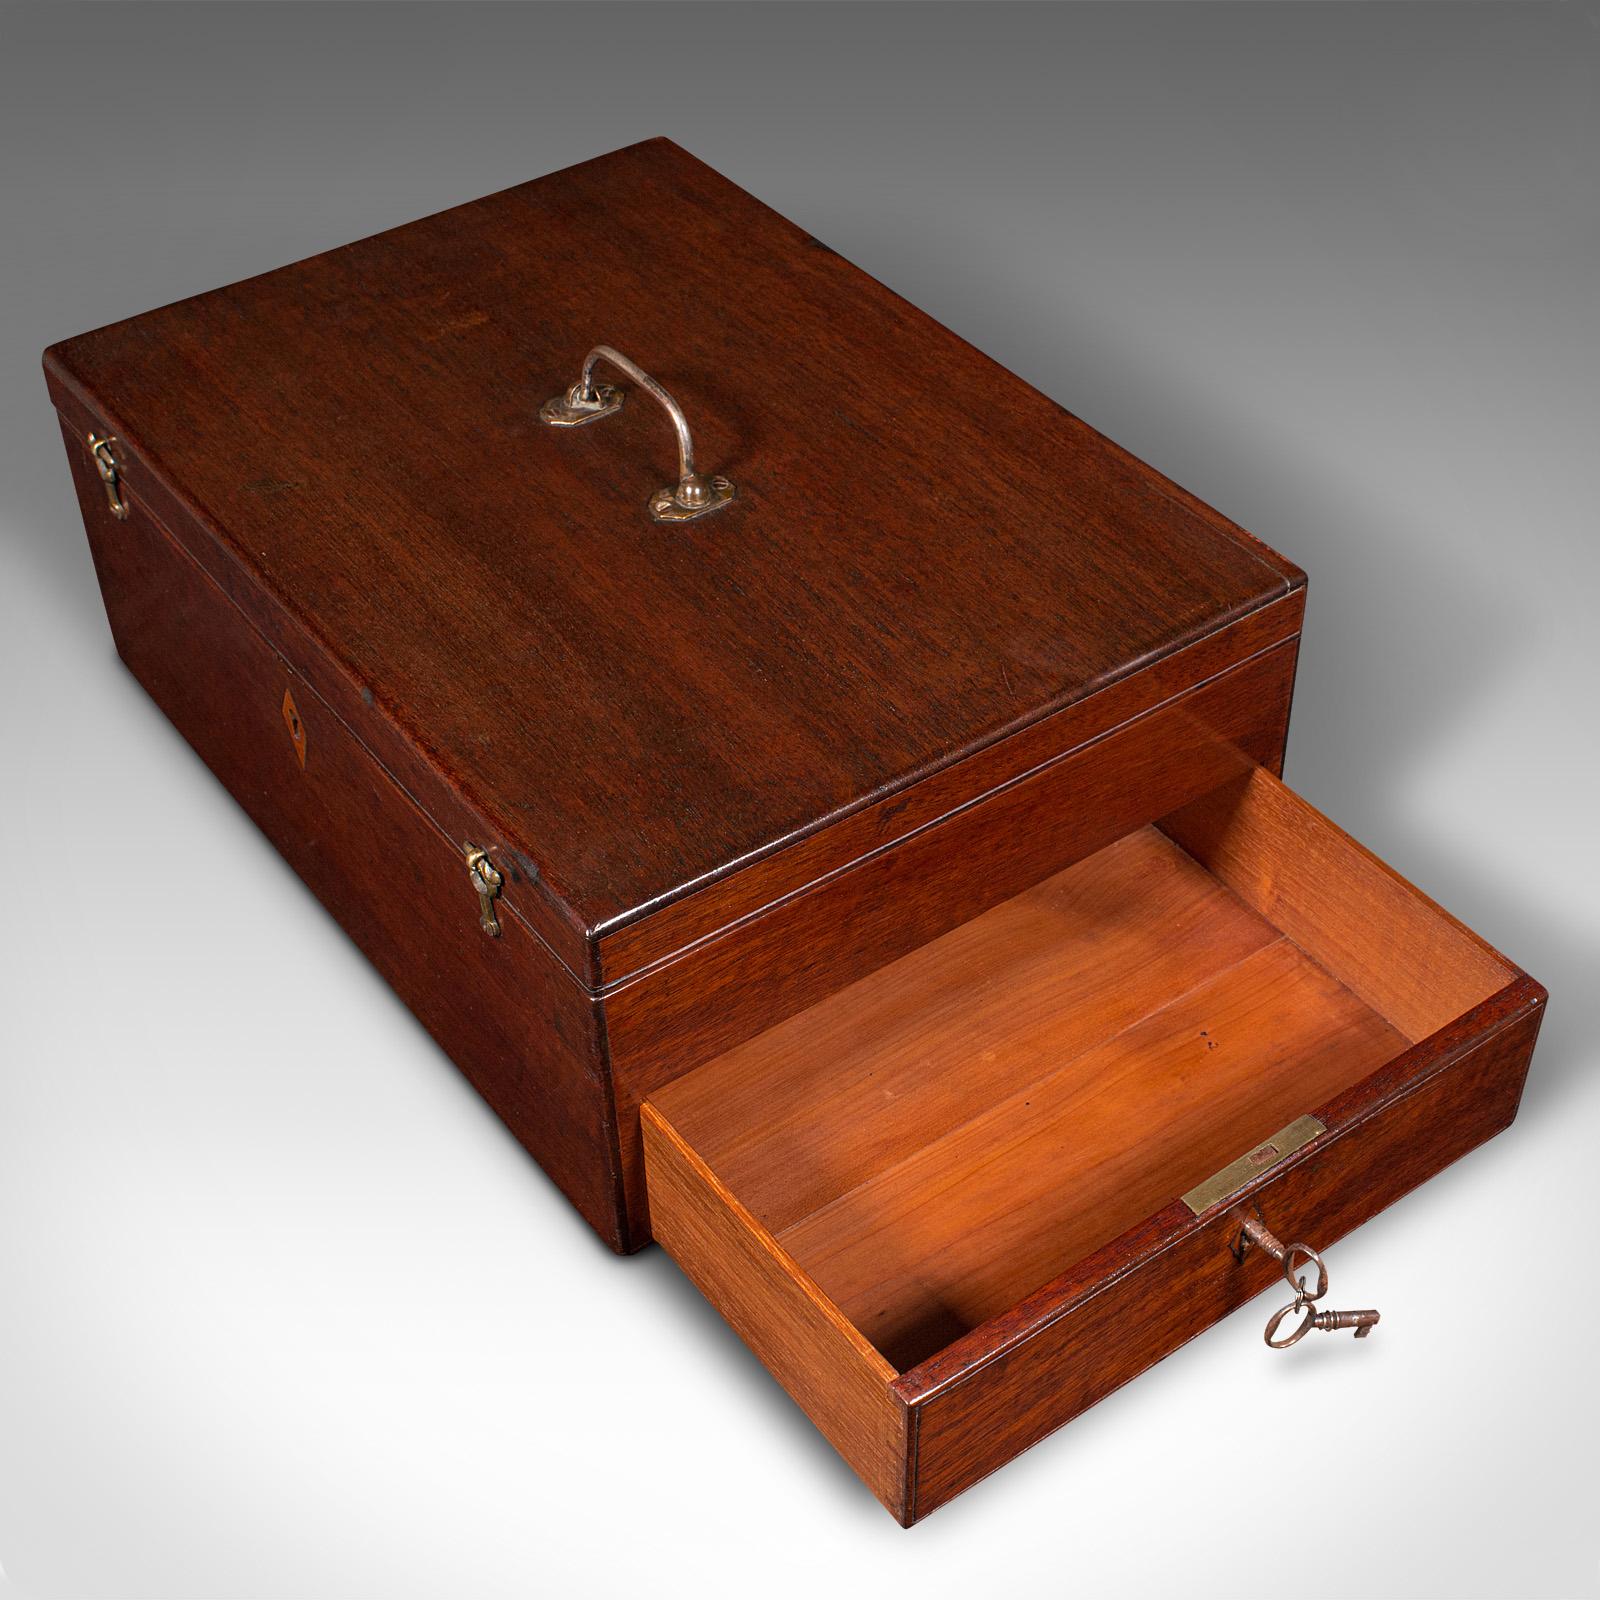 Antique Travelling Jewellery Salesman's Box, English Carry Case, Victorian, 1850 For Sale 2